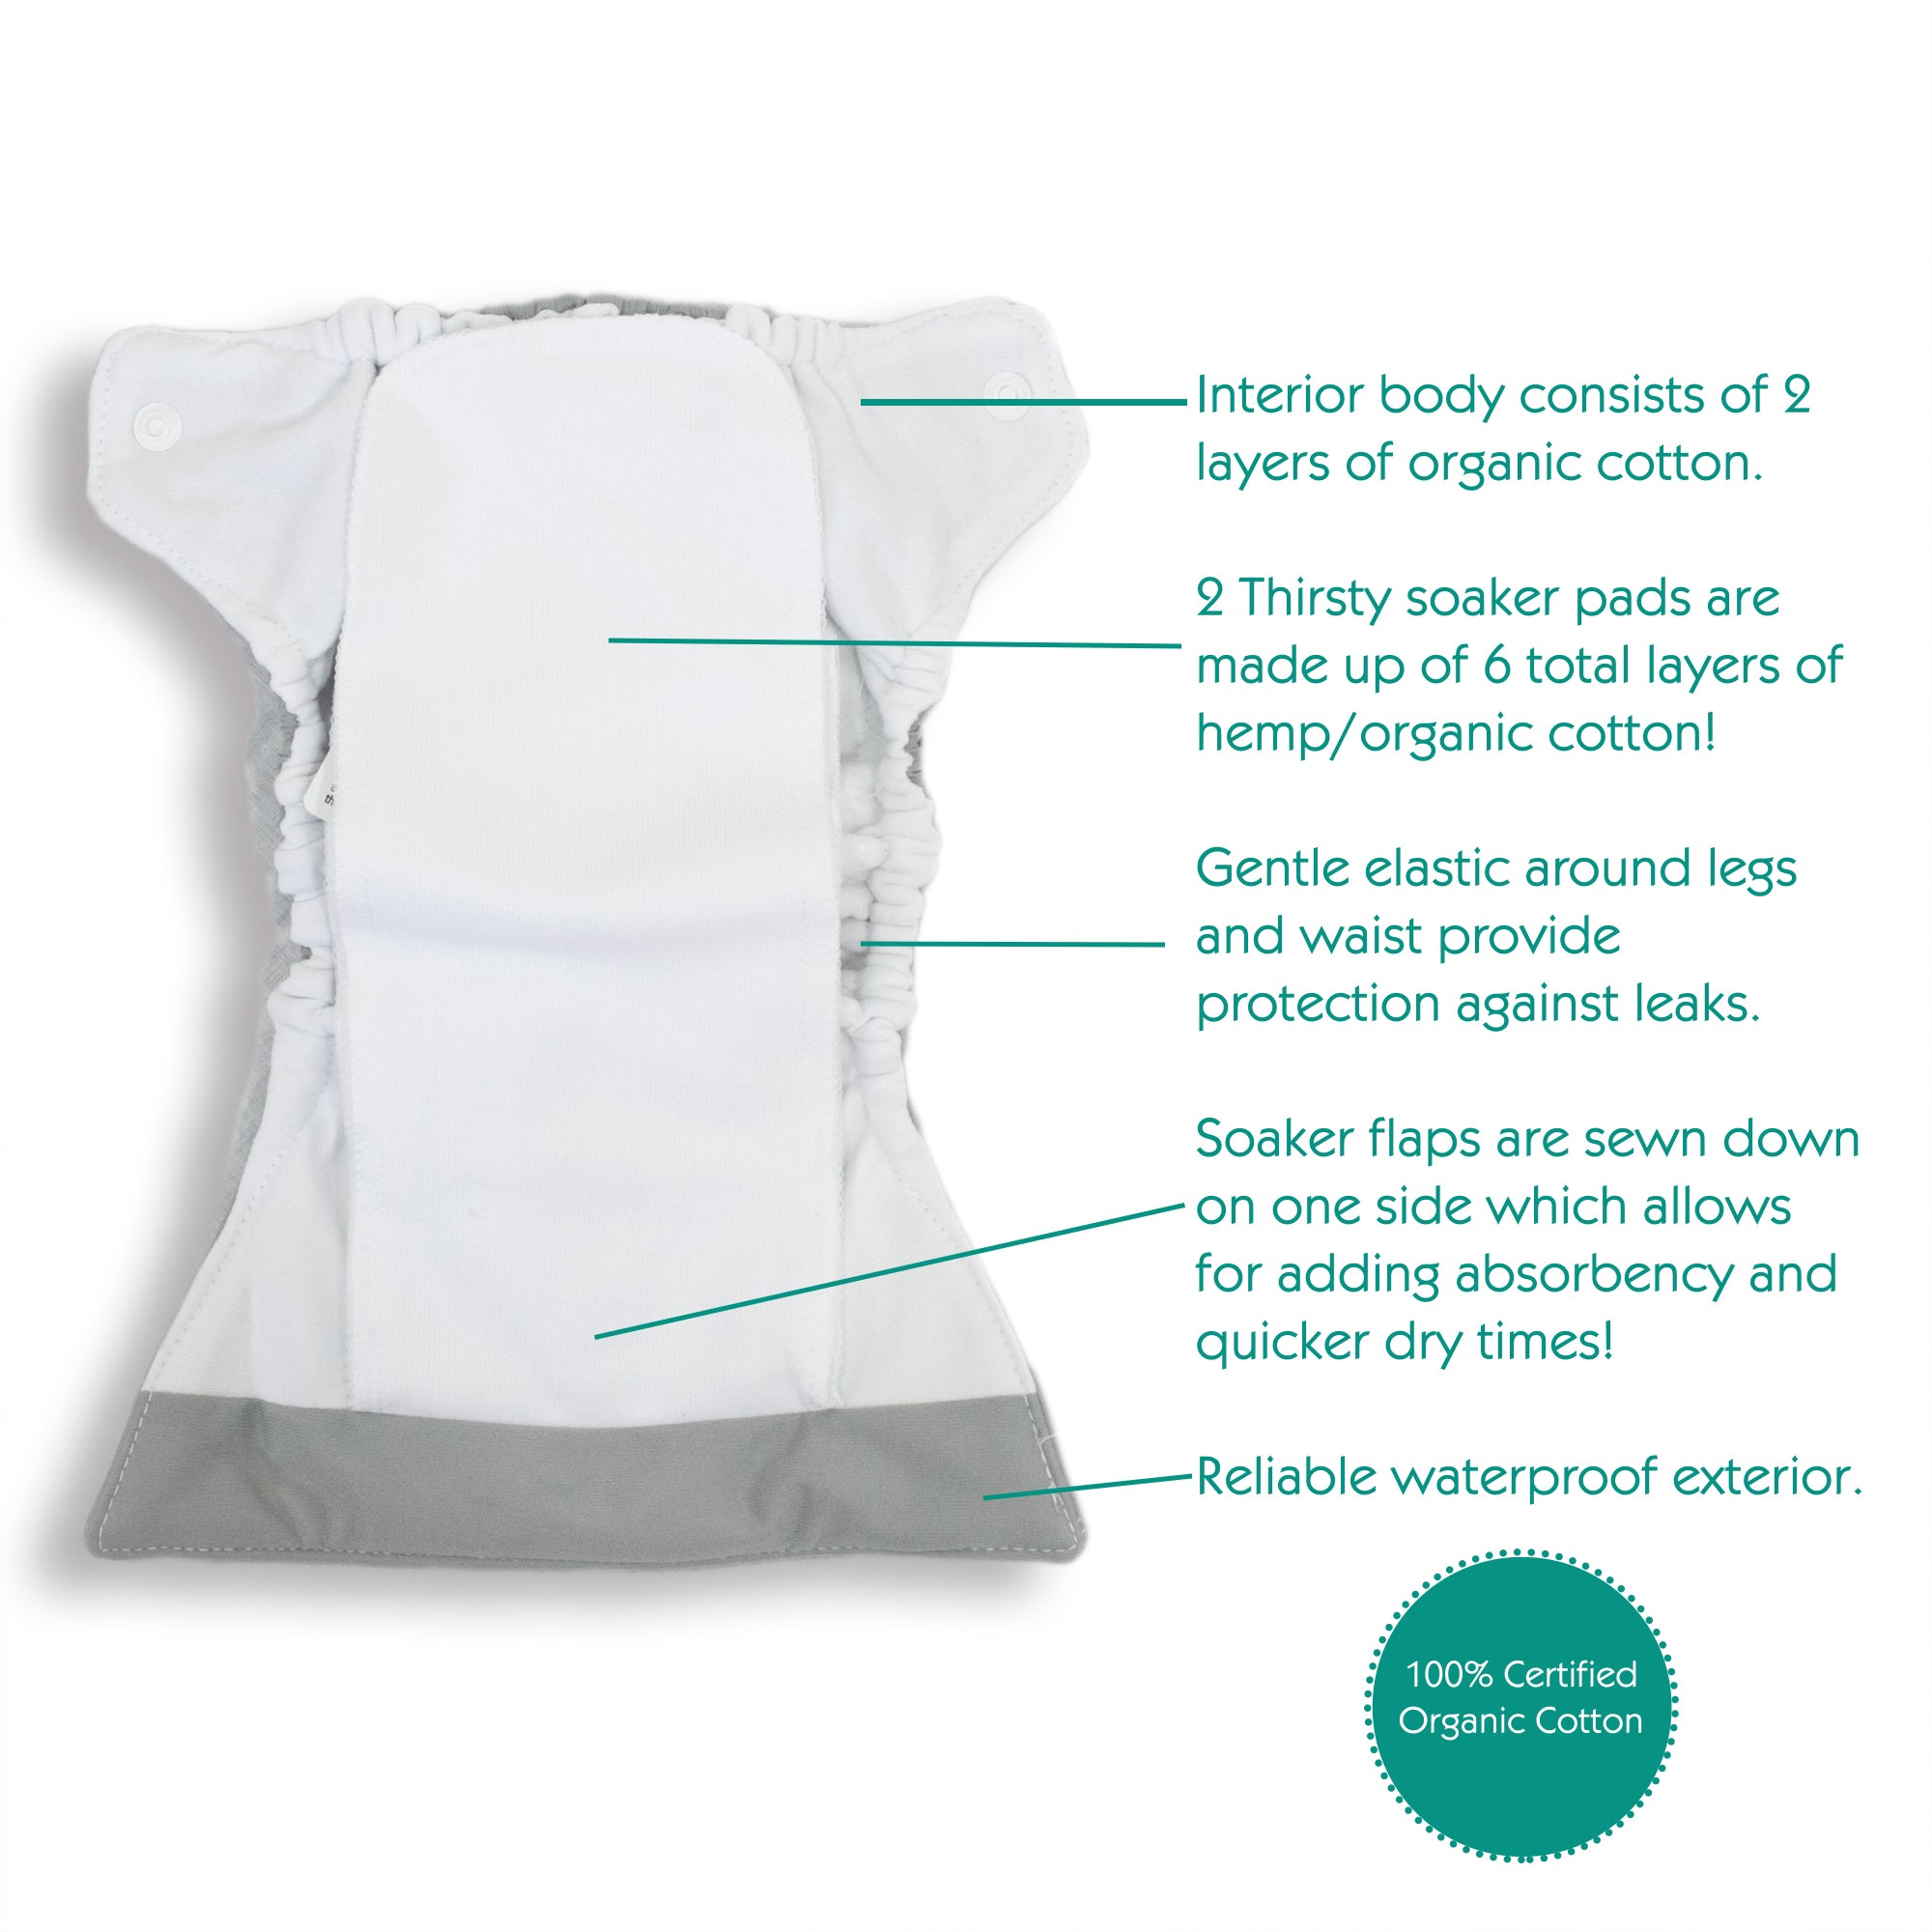 -Image of Thirsties Natural Newborn All in One diaper graphic. Arrow pointing to each part of the diaper indicating: Interior body consists of 2 layers of organic cotton; 2 thirsty soaker pads are made up of 6 total layers of hemp/organic cotton; gentle elastic around legs and waist provide protection against leaks; soaker flaps are sewn down on one side which allows for adding absorbency and quicker dry times; reliable waterproof exterior; 100% certified organic cotton seal